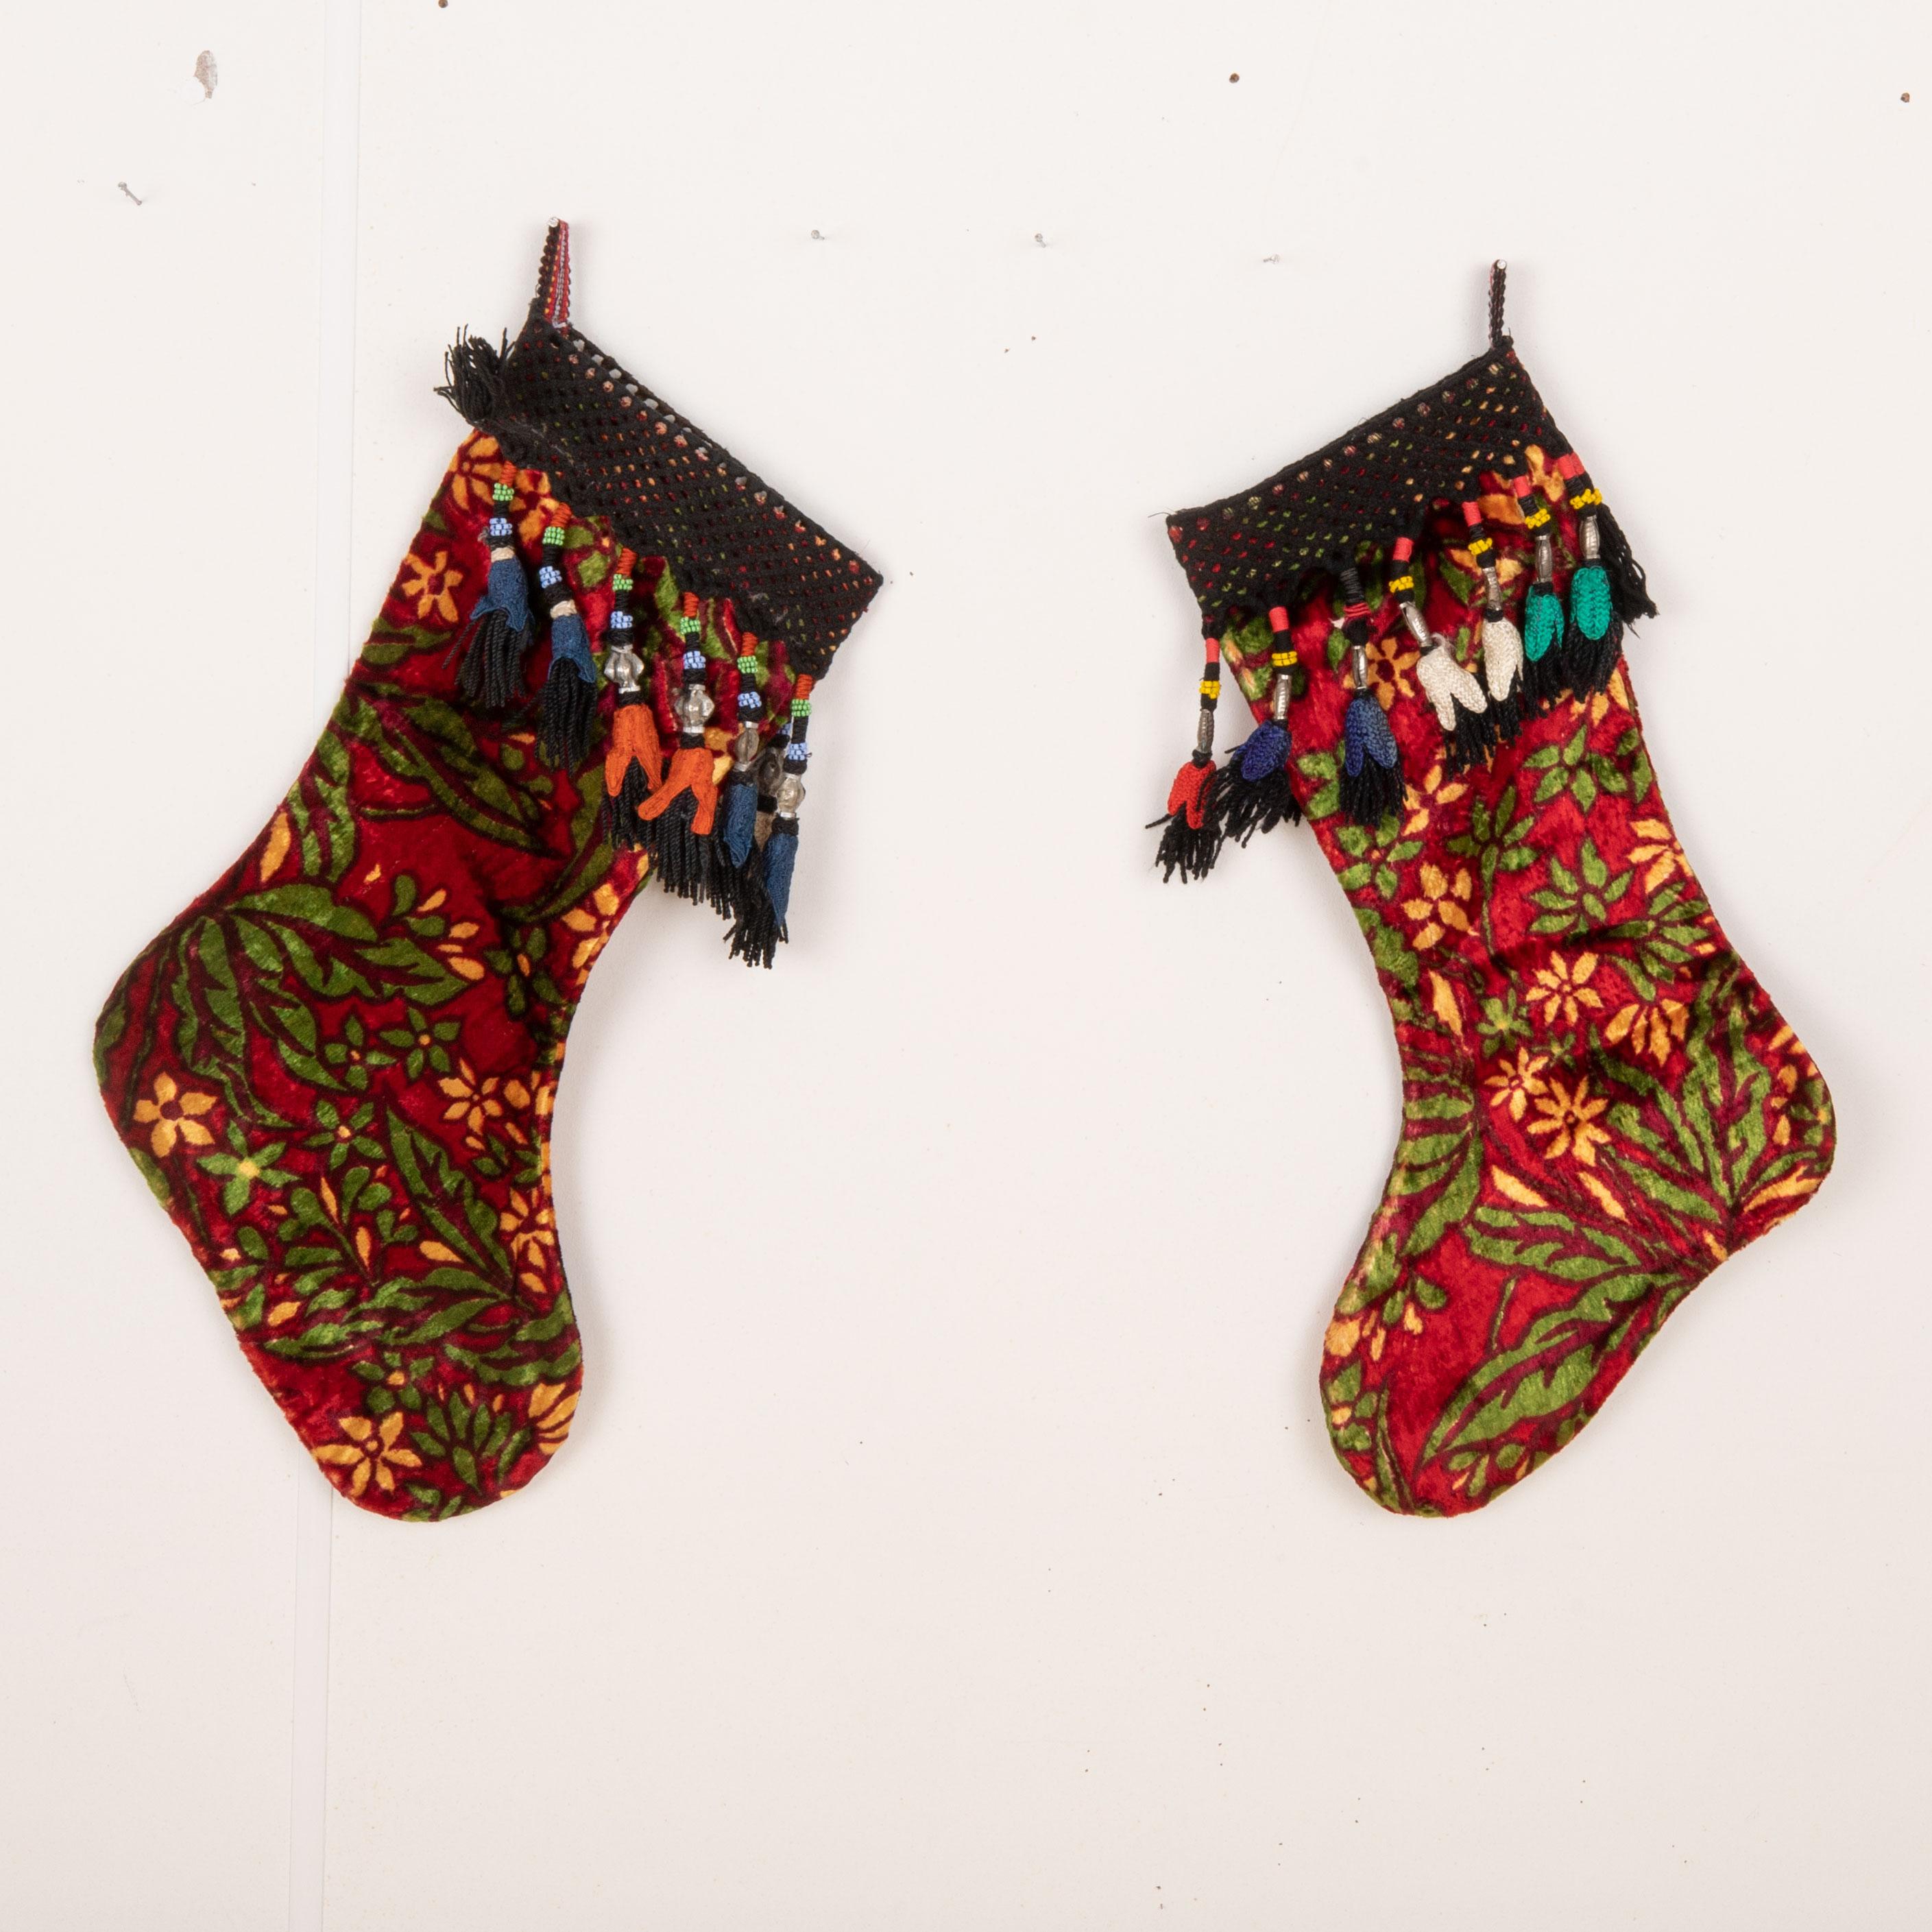 These Christmas Stockings were made from mid 20th C. Uzbek Velvet Fragments.

Please note these were made from vintage Uzbek Velvet fragments.
